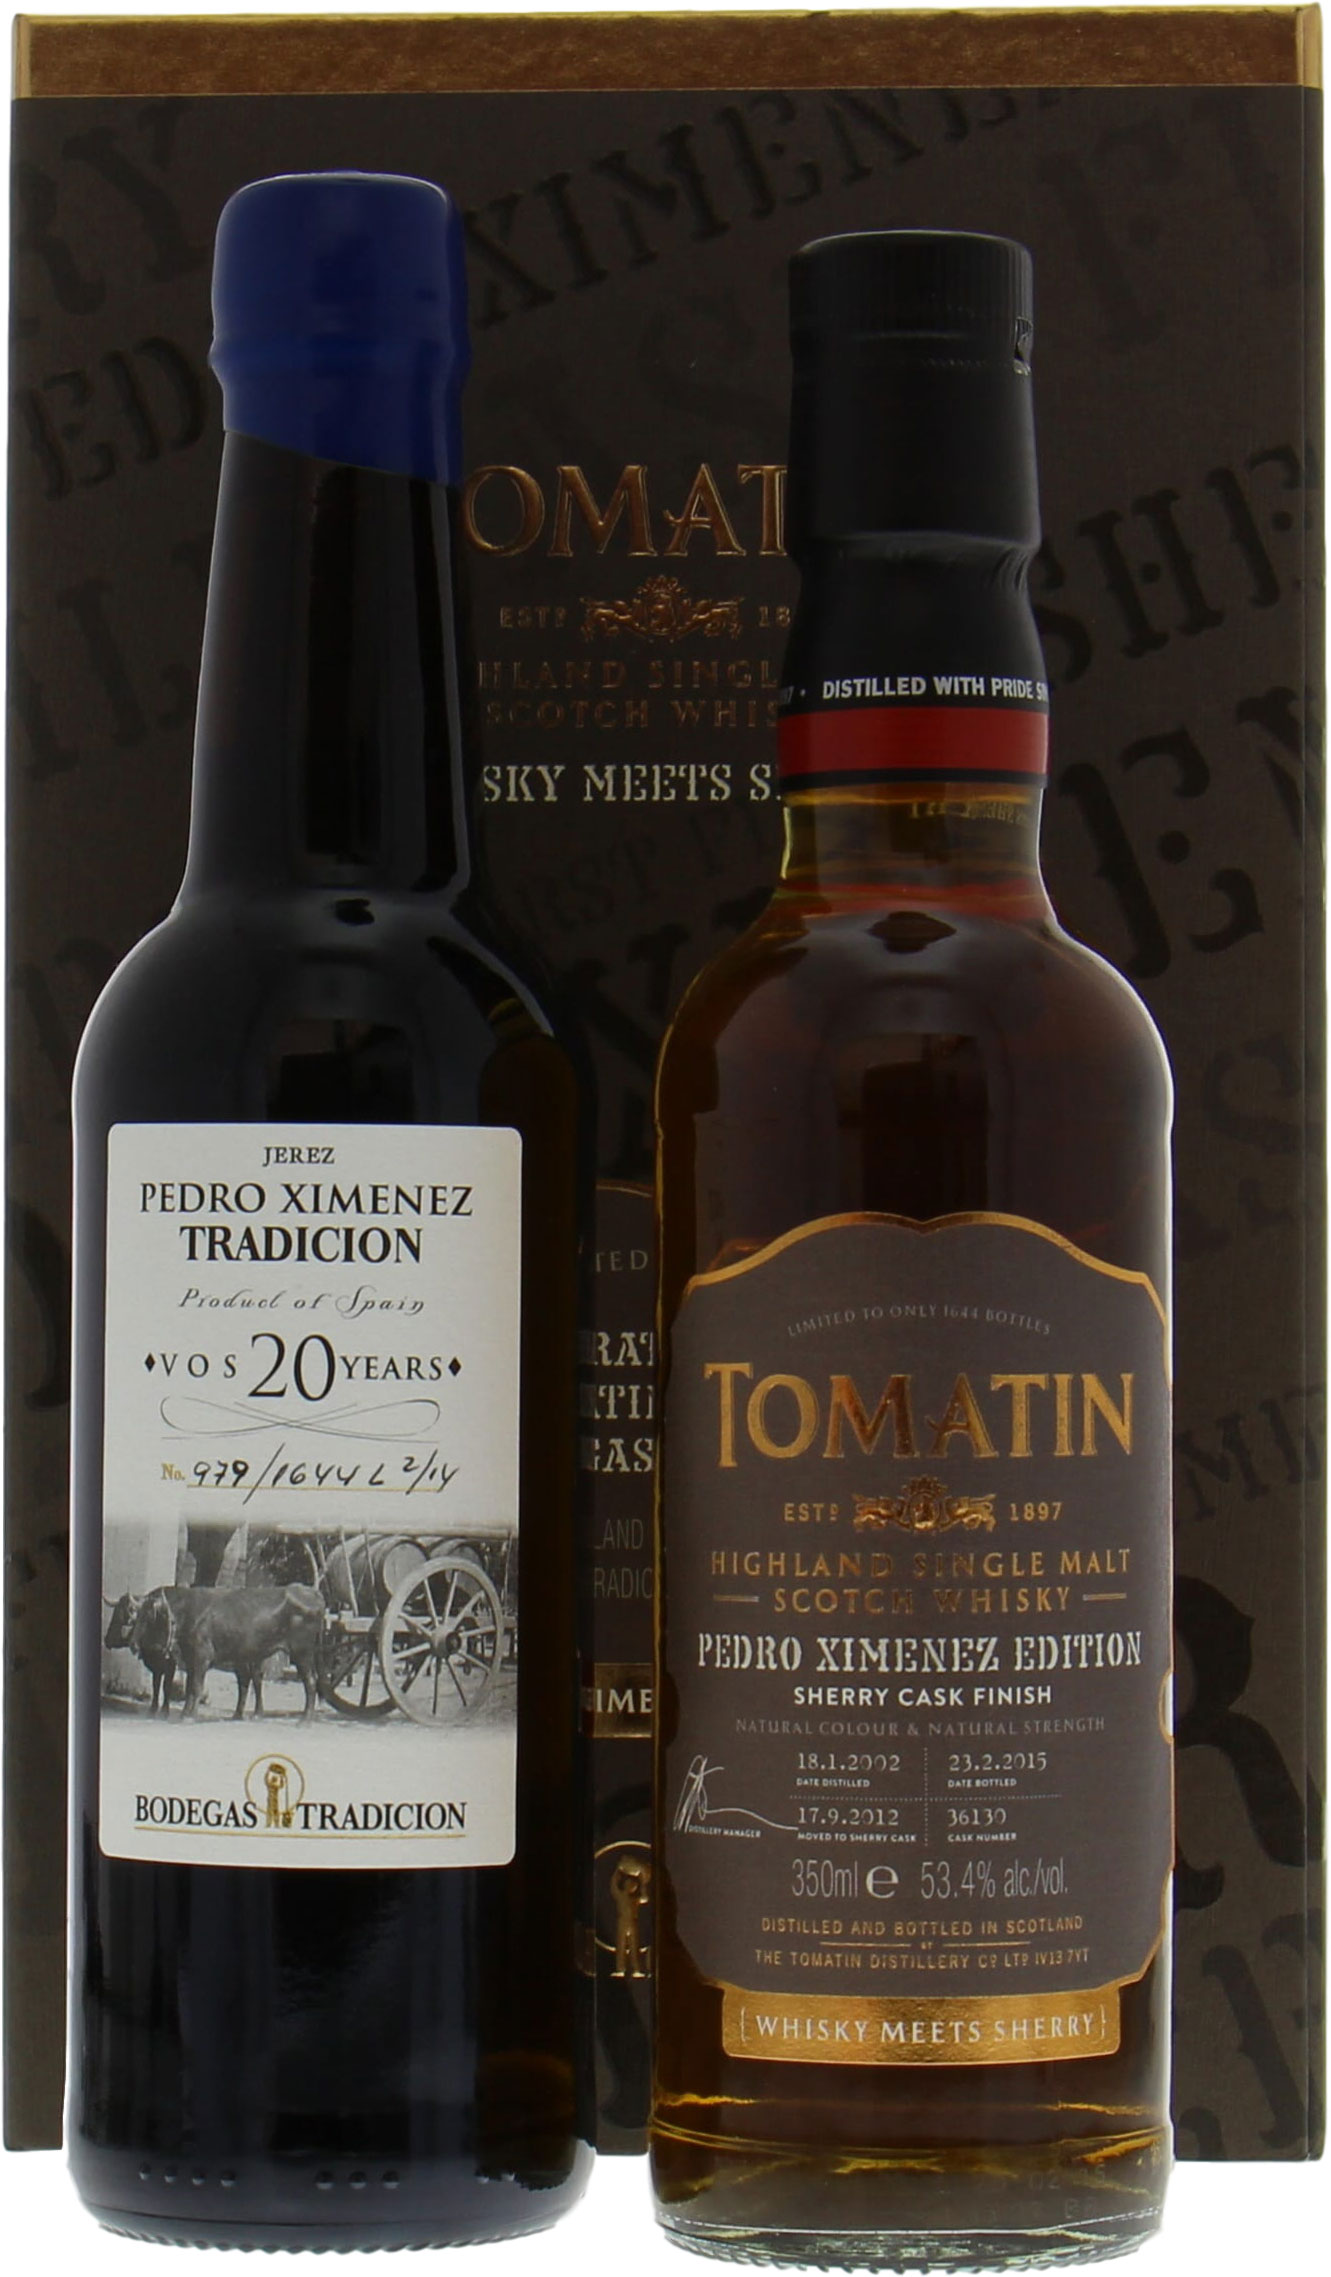 Tomatin - 13 Years Old Cask 36130 & 1 Bottle of PX Sherry 20 Years Old 53,4% 2002 In Original Container